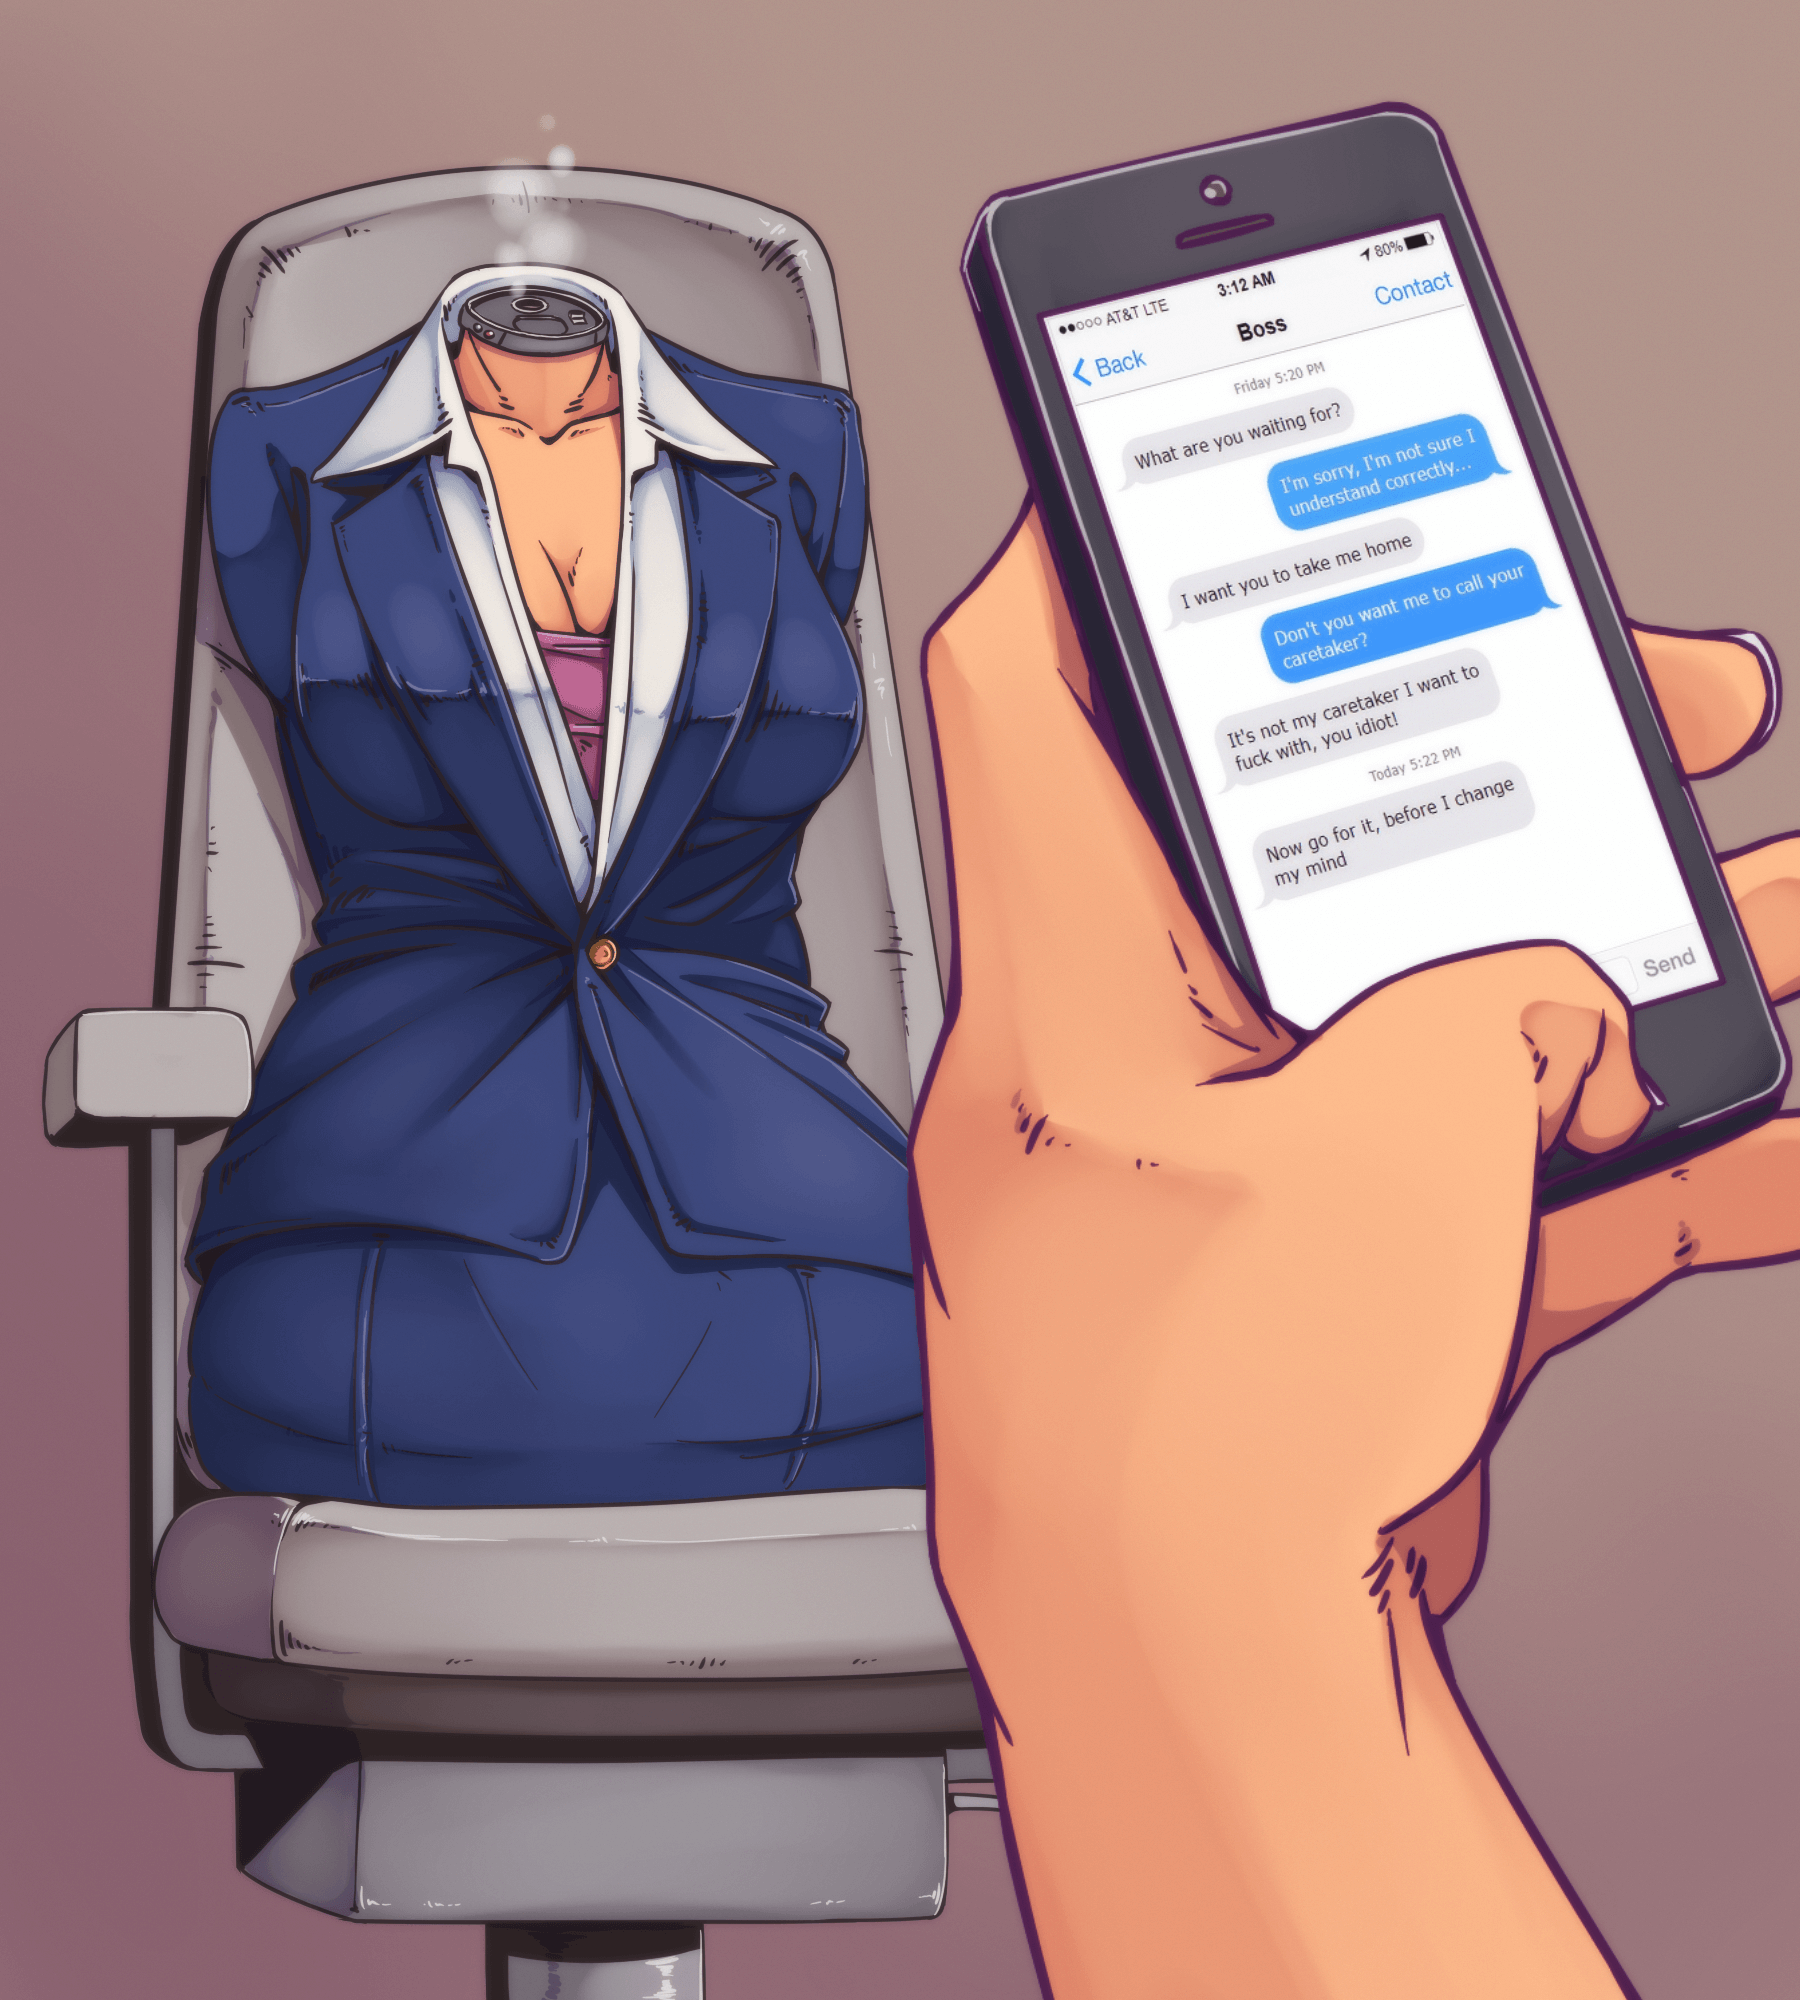 A drawn torso without head or limbs, with a phone and hand in foreground 'talking' to her about hooking up.